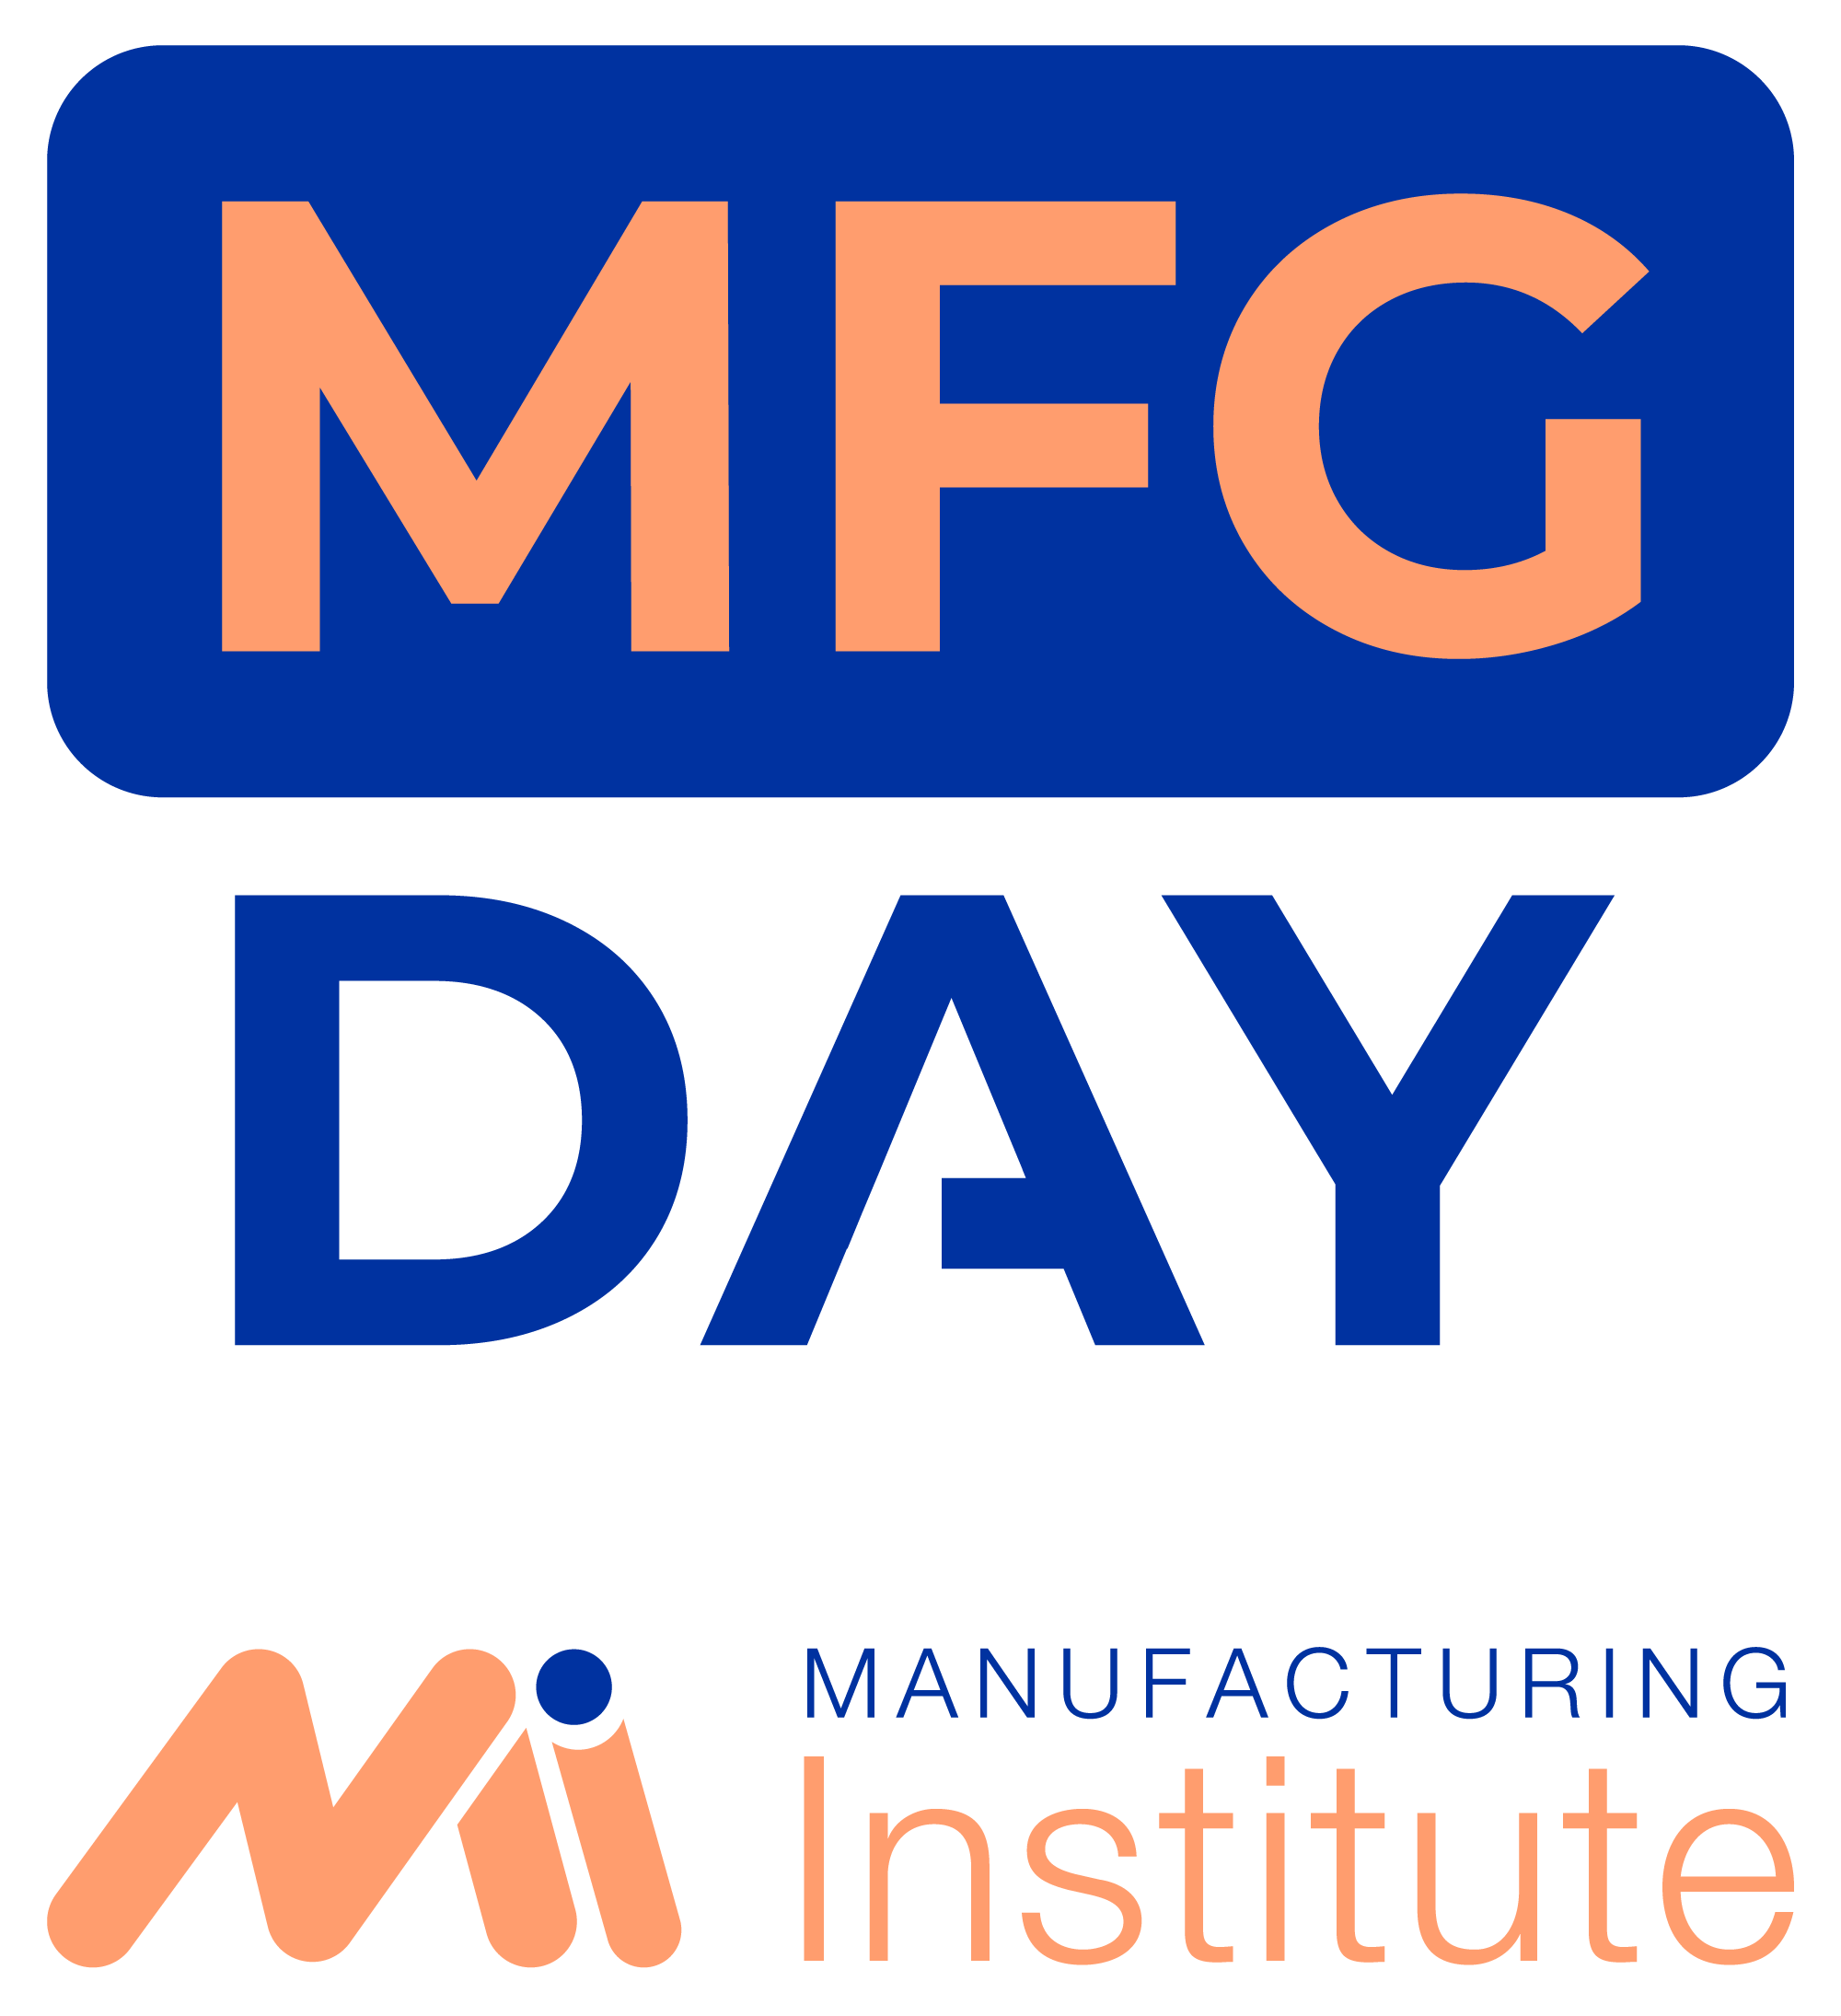 Manufacturing Day 2020